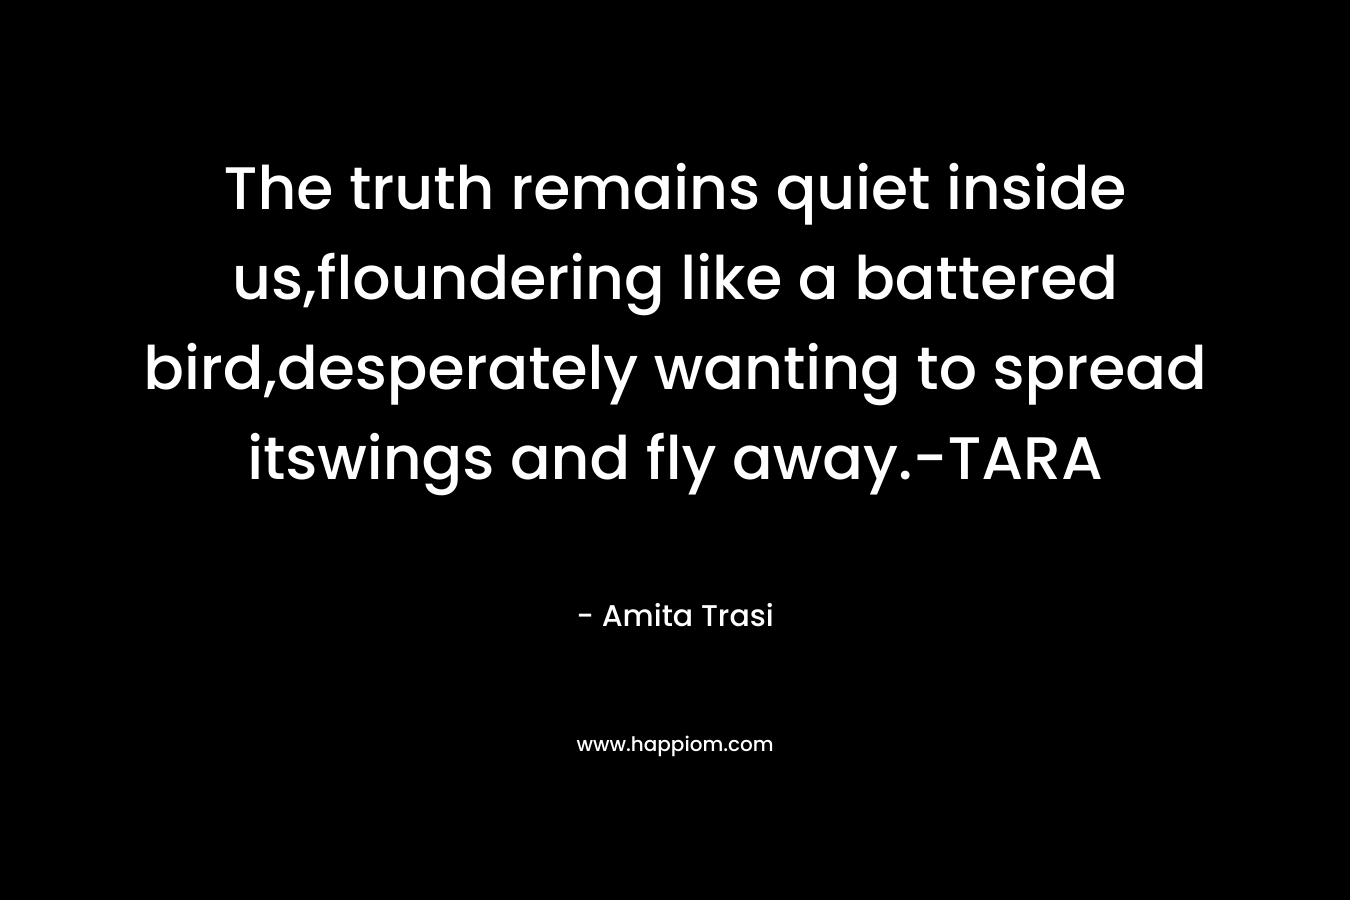 The truth remains quiet inside us,floundering like a battered bird,desperately wanting to spread itswings and fly away.-TARA – Amita Trasi